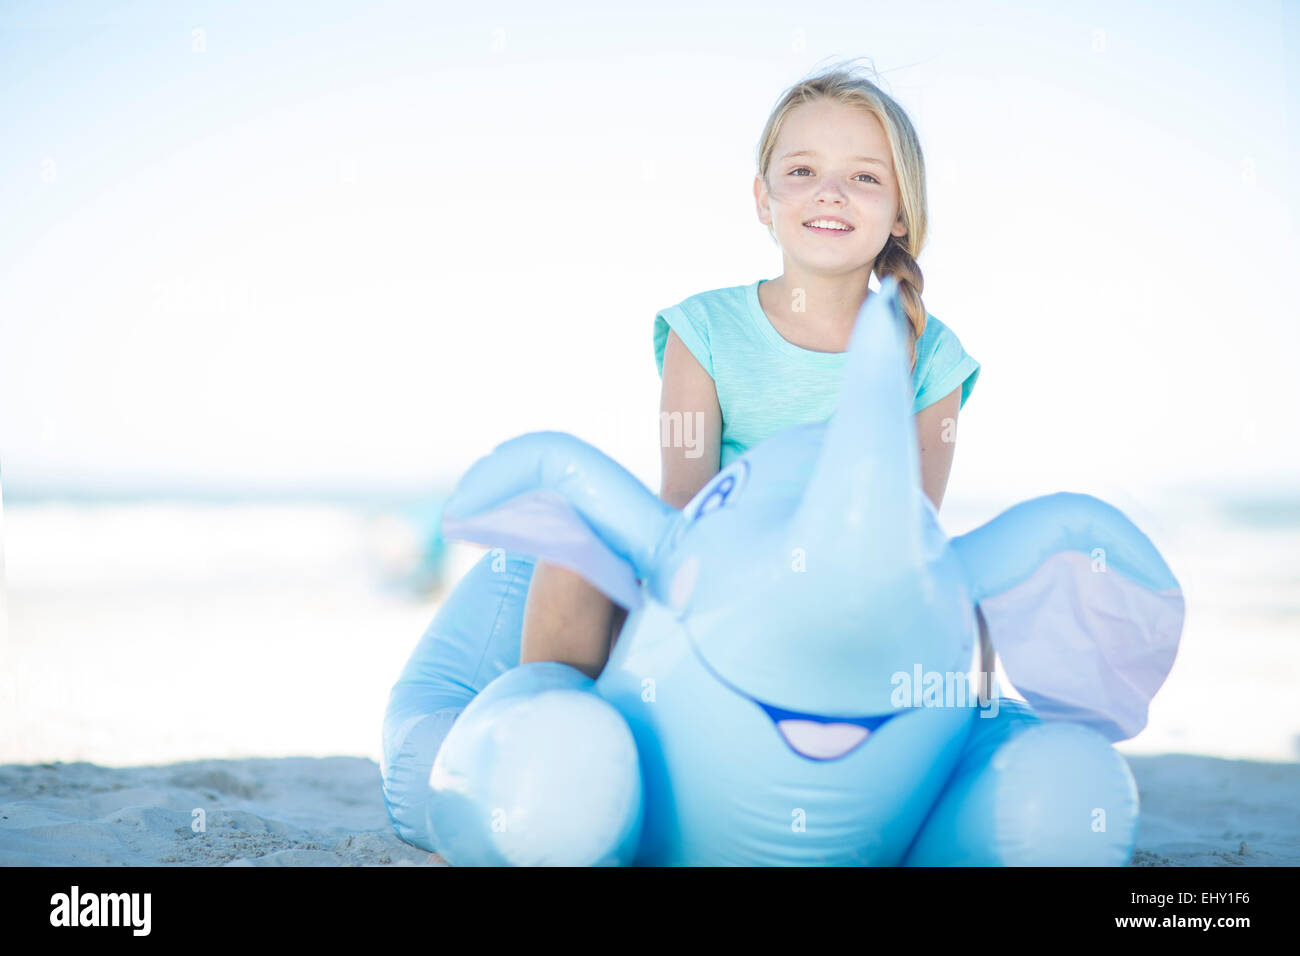 Smiling girl on beach sitting on an inflatable elephant Stock Photo